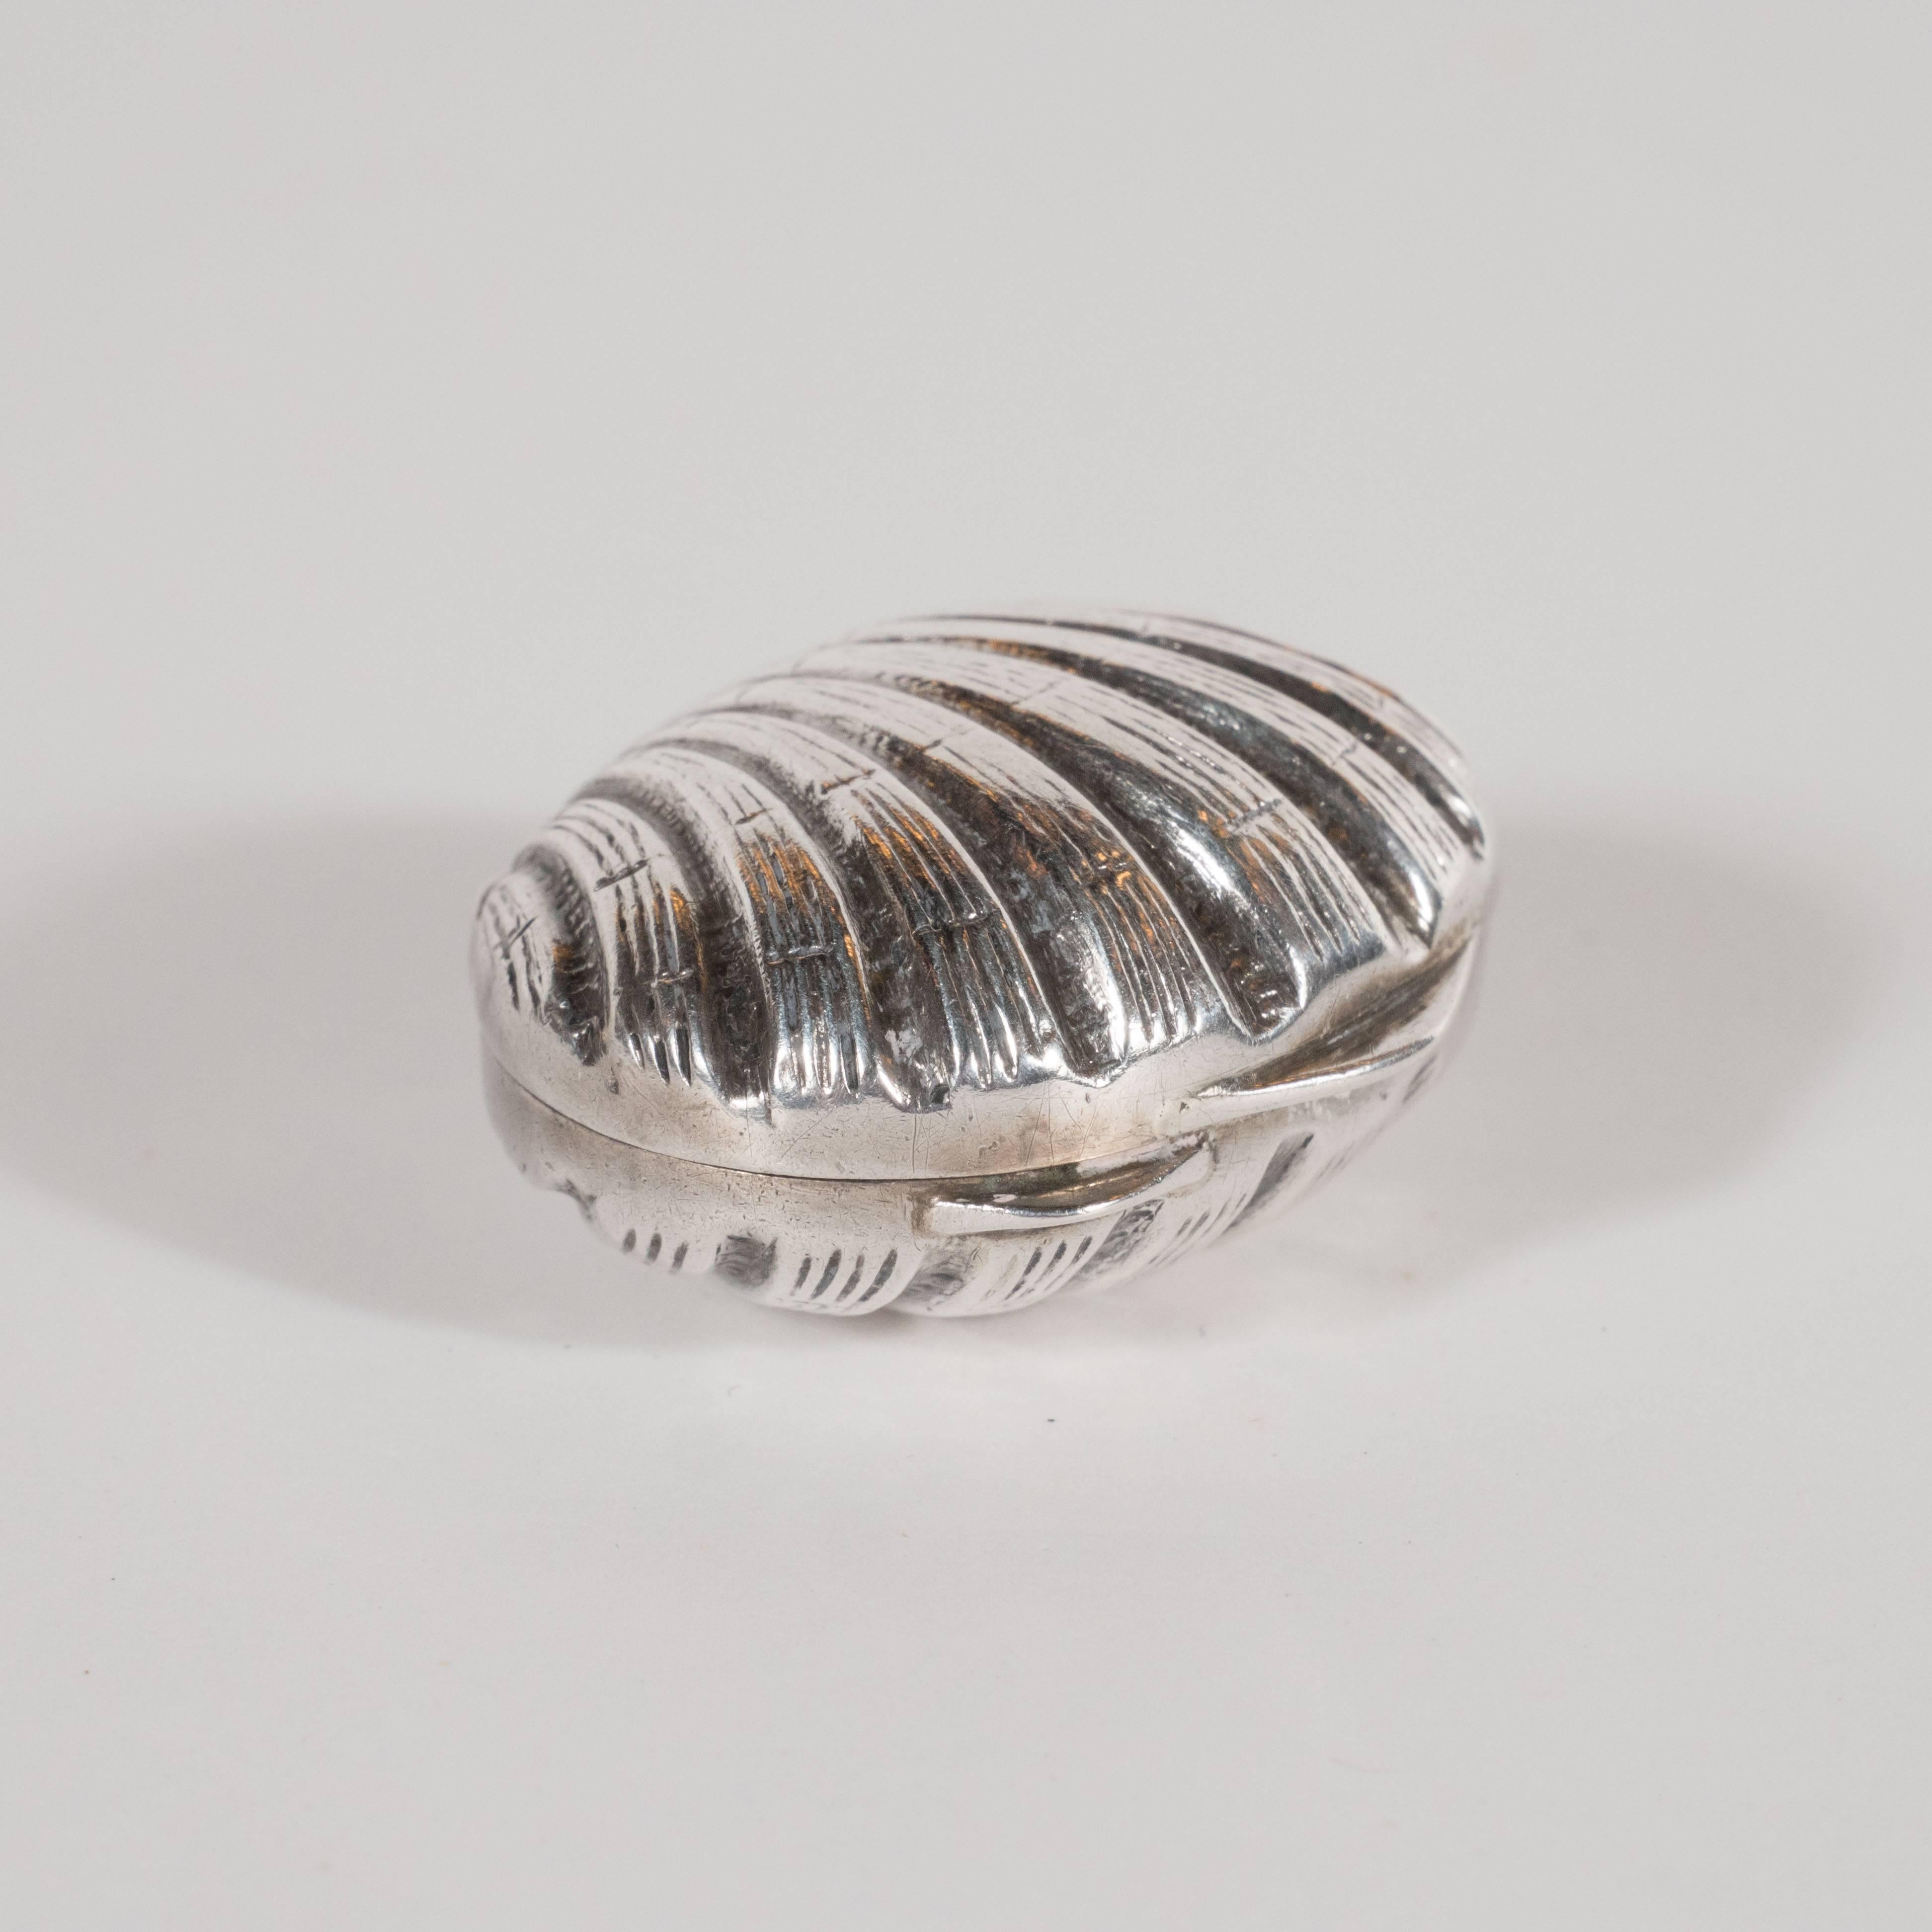 This lovely sterling silver pill case, fabricated in the form of a scallop shell, was realized by Tiffany & Co.- the most storied and celebrated name in American silver- circa 1960. It features finely reeded curvilinear lines extending out from the